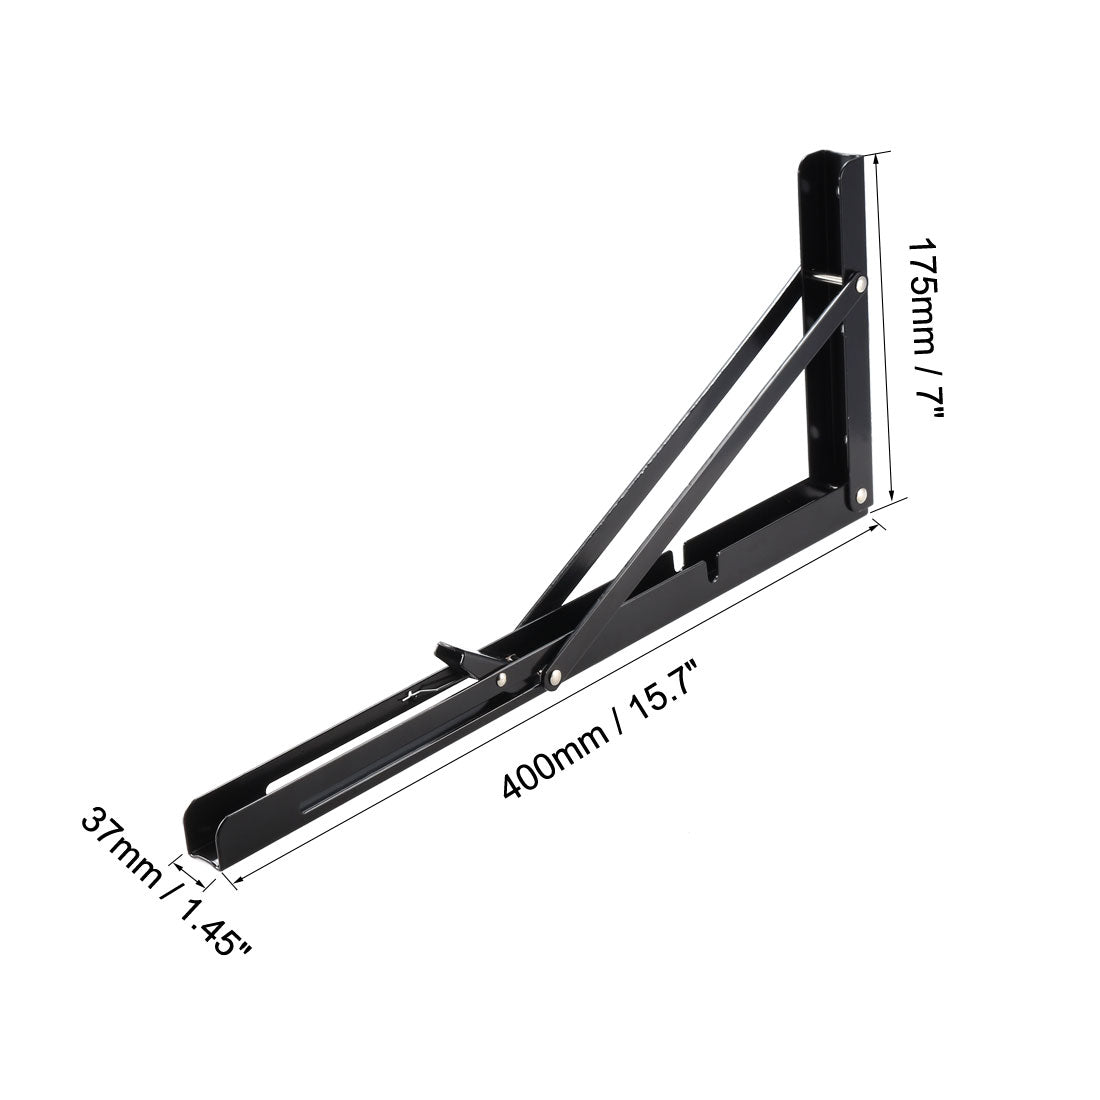 uxcell Uxcell Folding Bracket 16 inch 400mm for Shelves Table Desk Wall Mounted Support Collapsible Long Release Arm Space Saving Carbon Steel